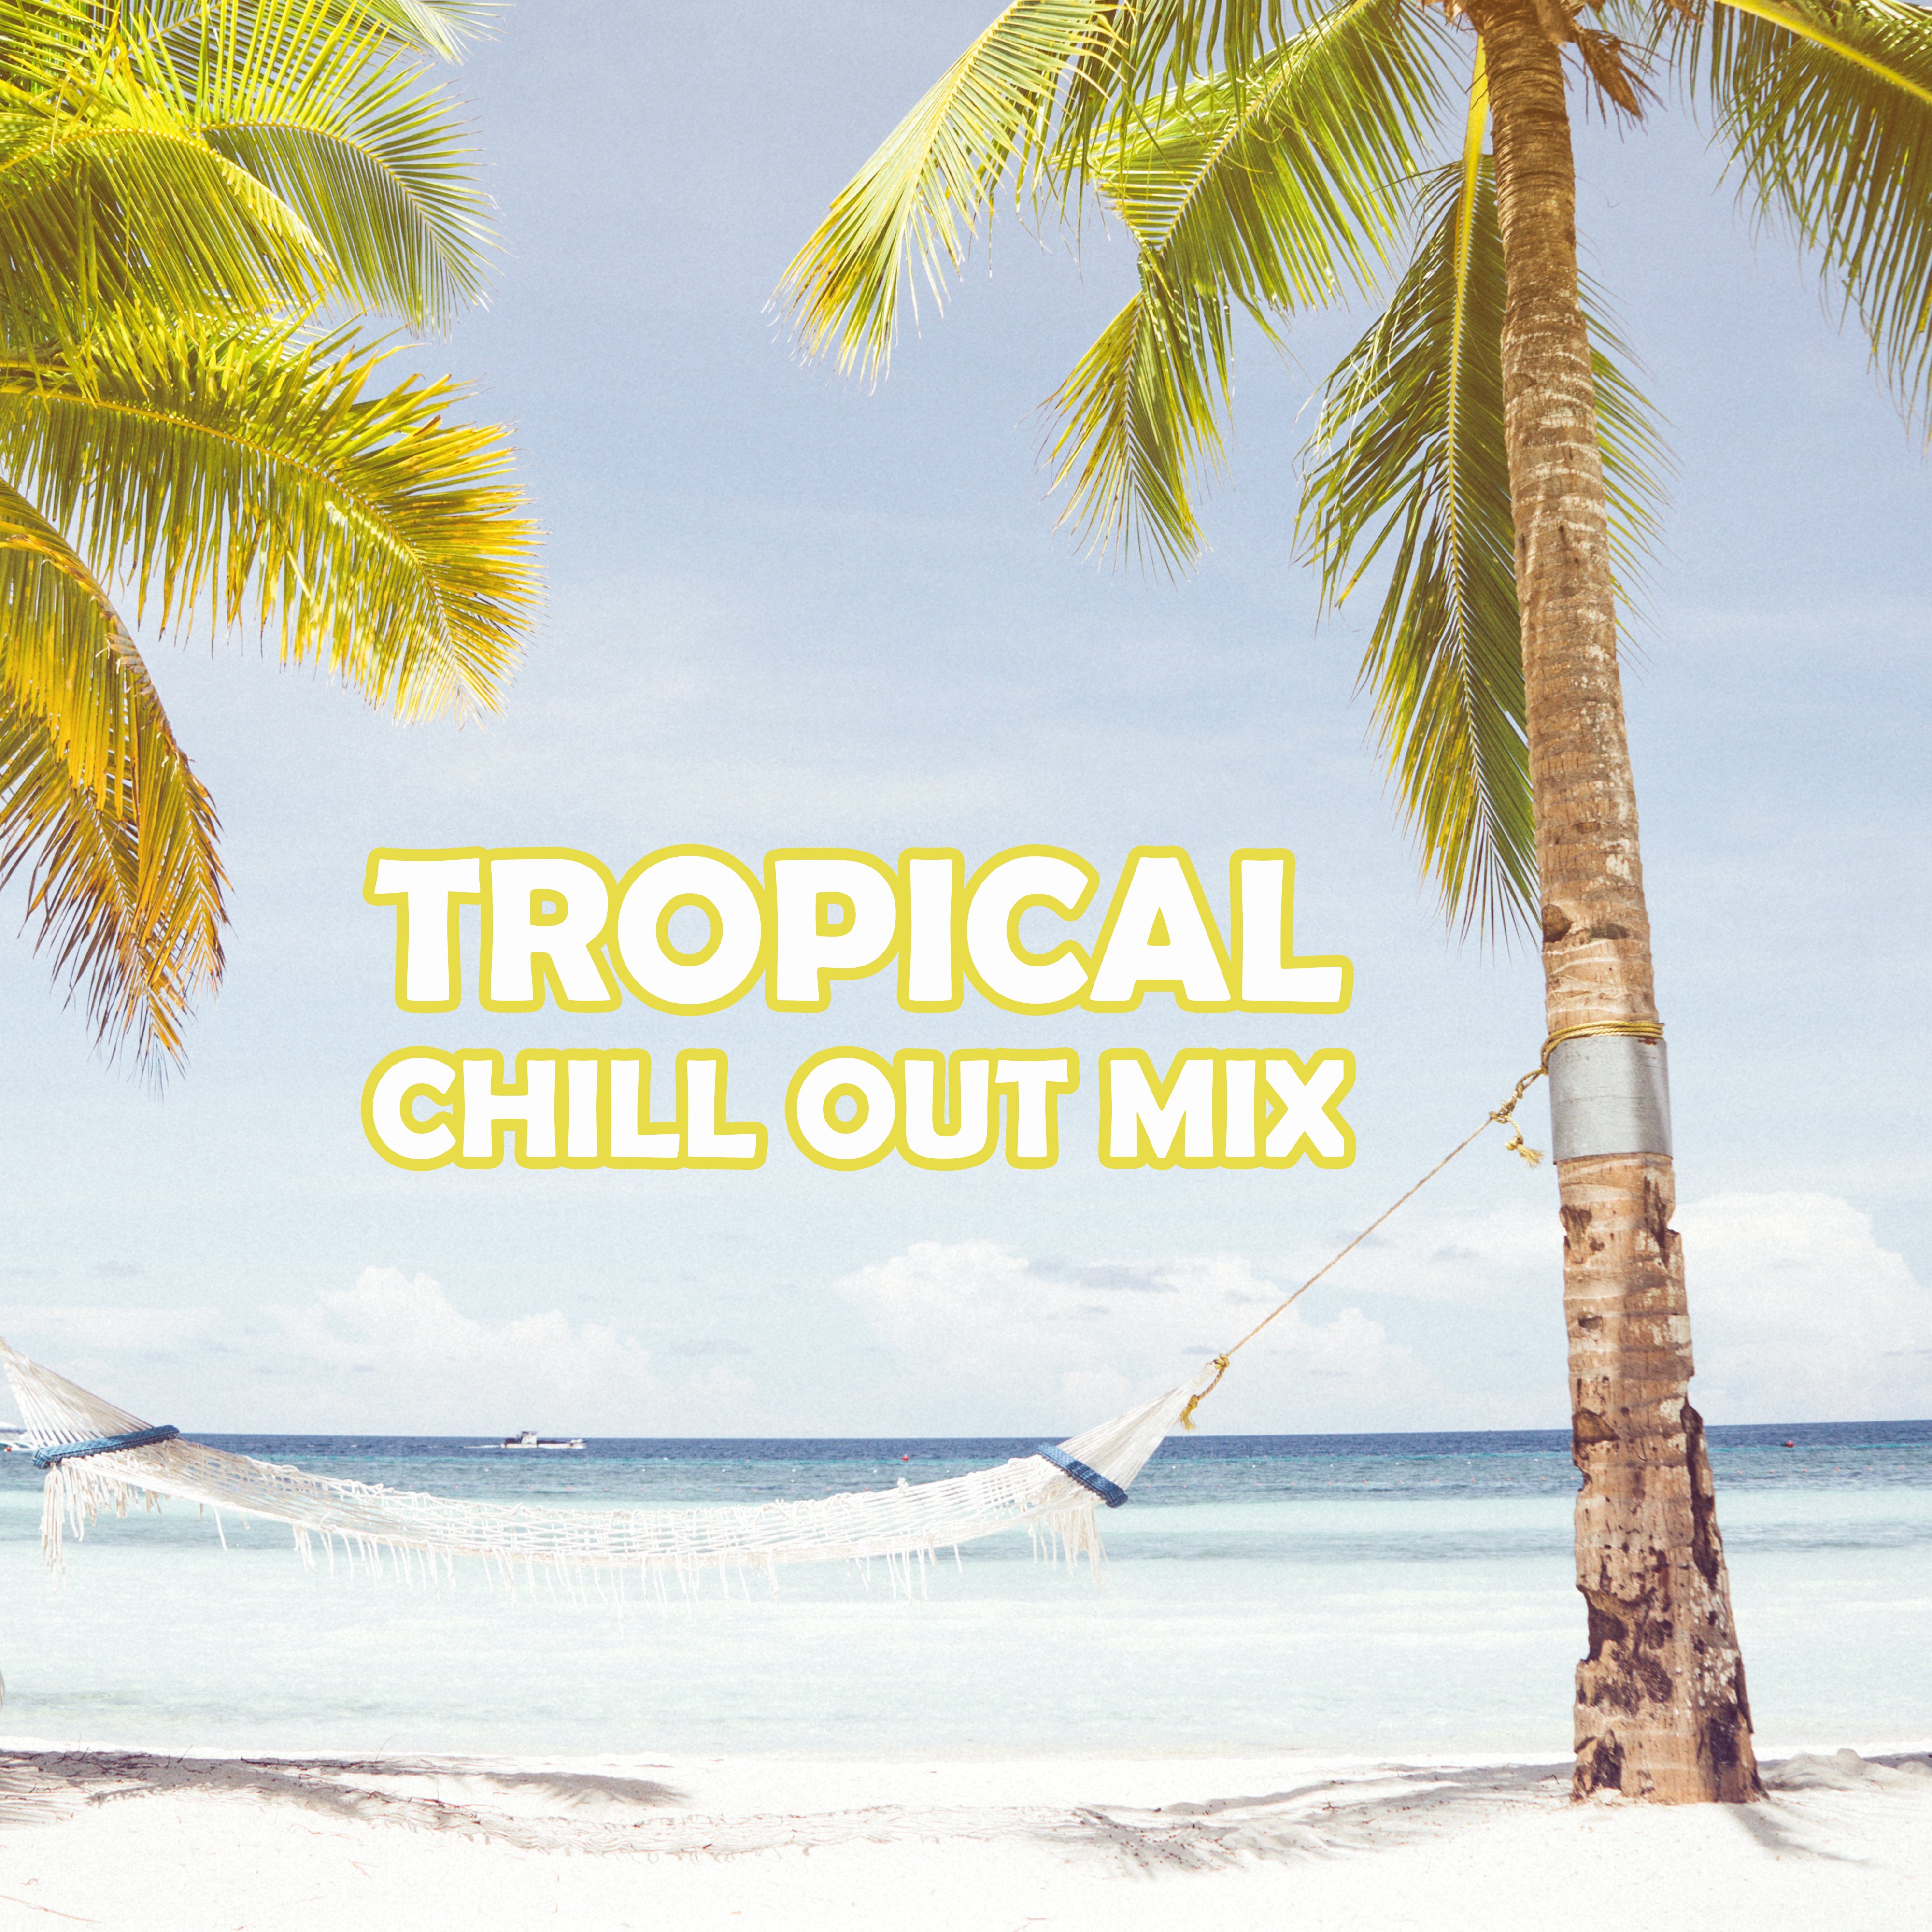 Tropical Chill Out Mix  Chill Out 2017, Party Music, Tropical Island, Hot Summer Vibes